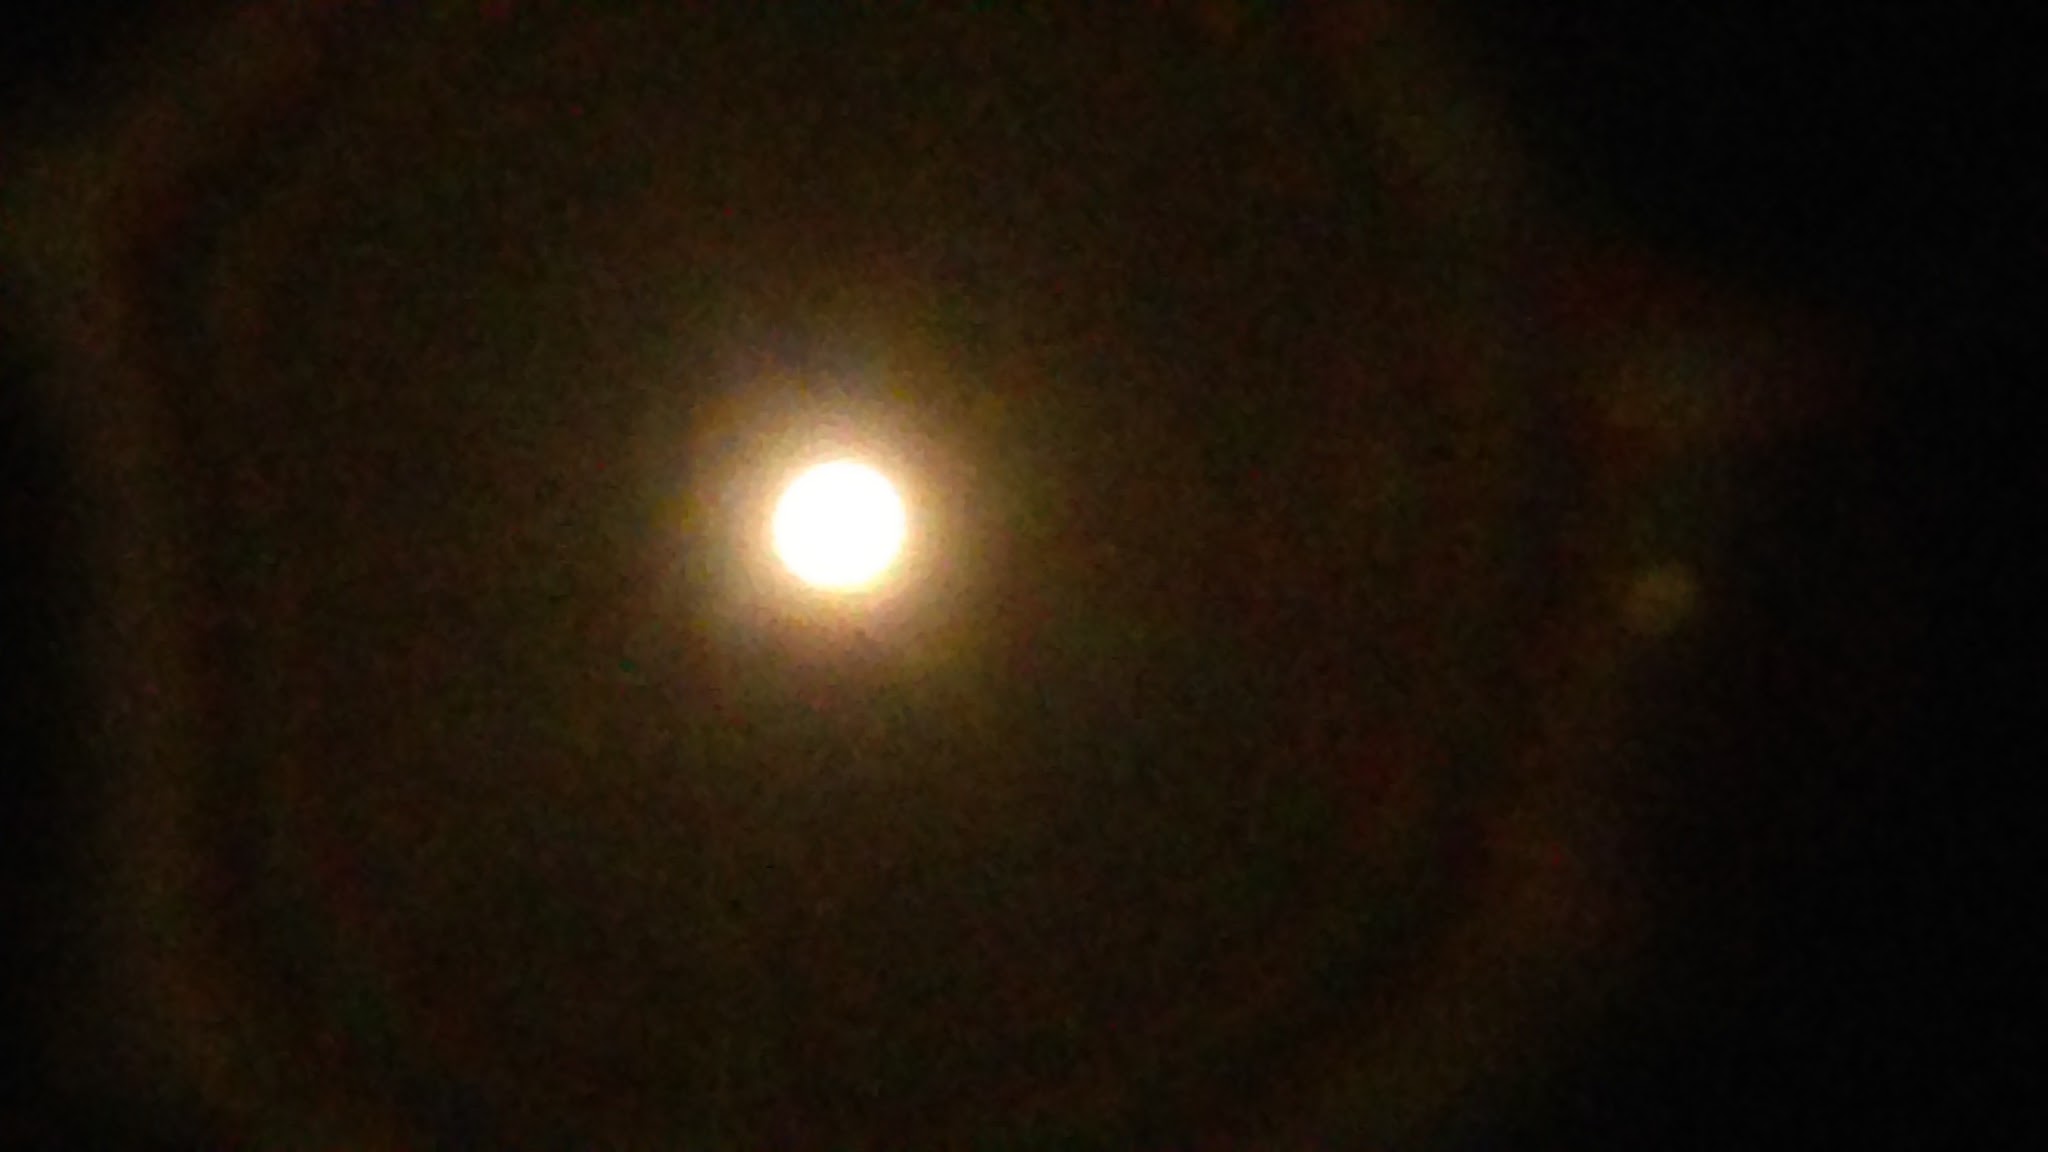 Magnified version of the Halo around the moon